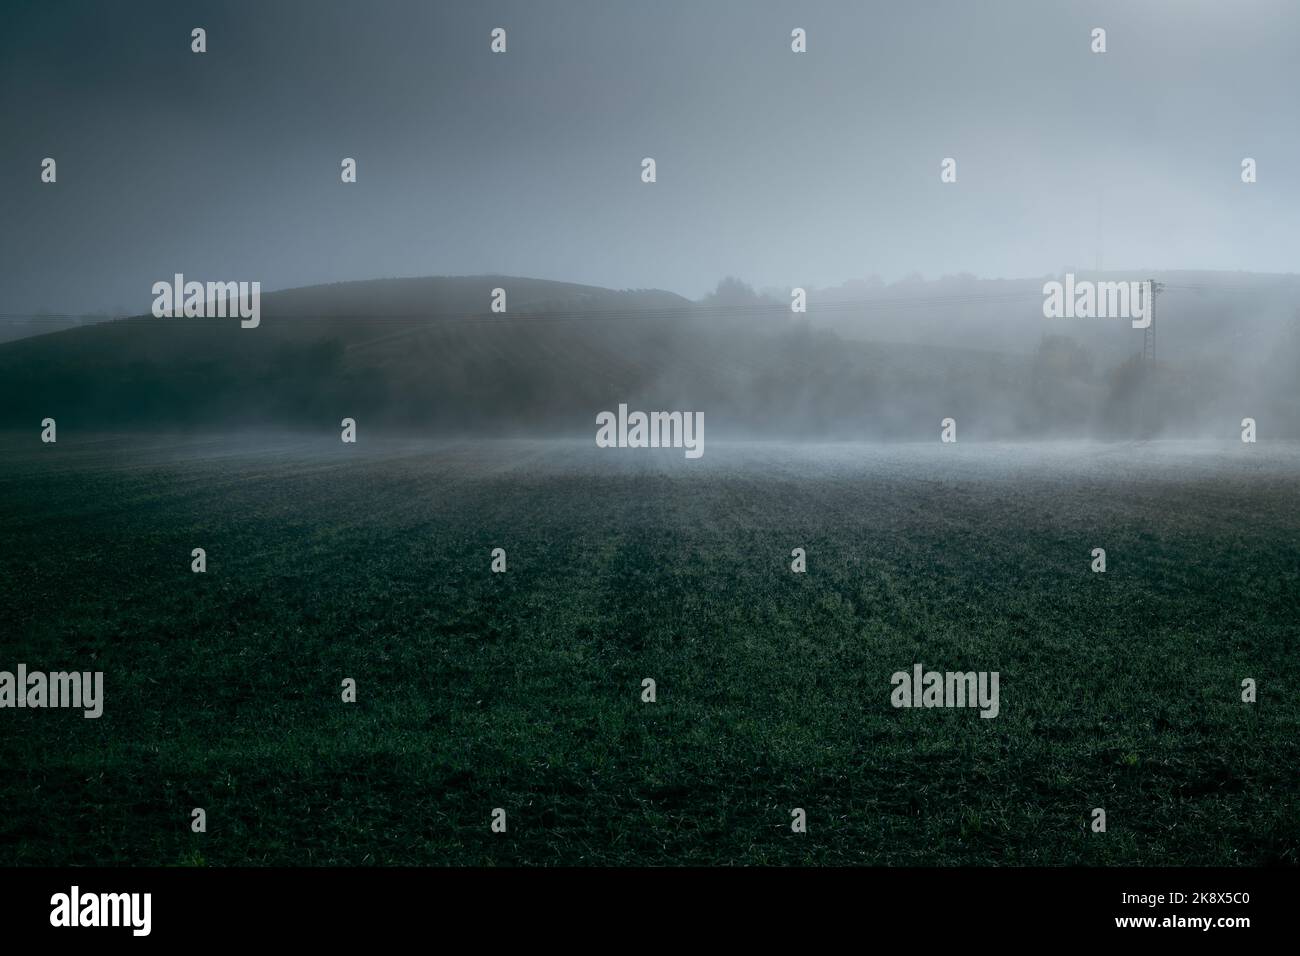 Clouds of fog drift over a field of fresh greenery in front of shallow hills in dark atmosphere after a cold night. Stock Photo